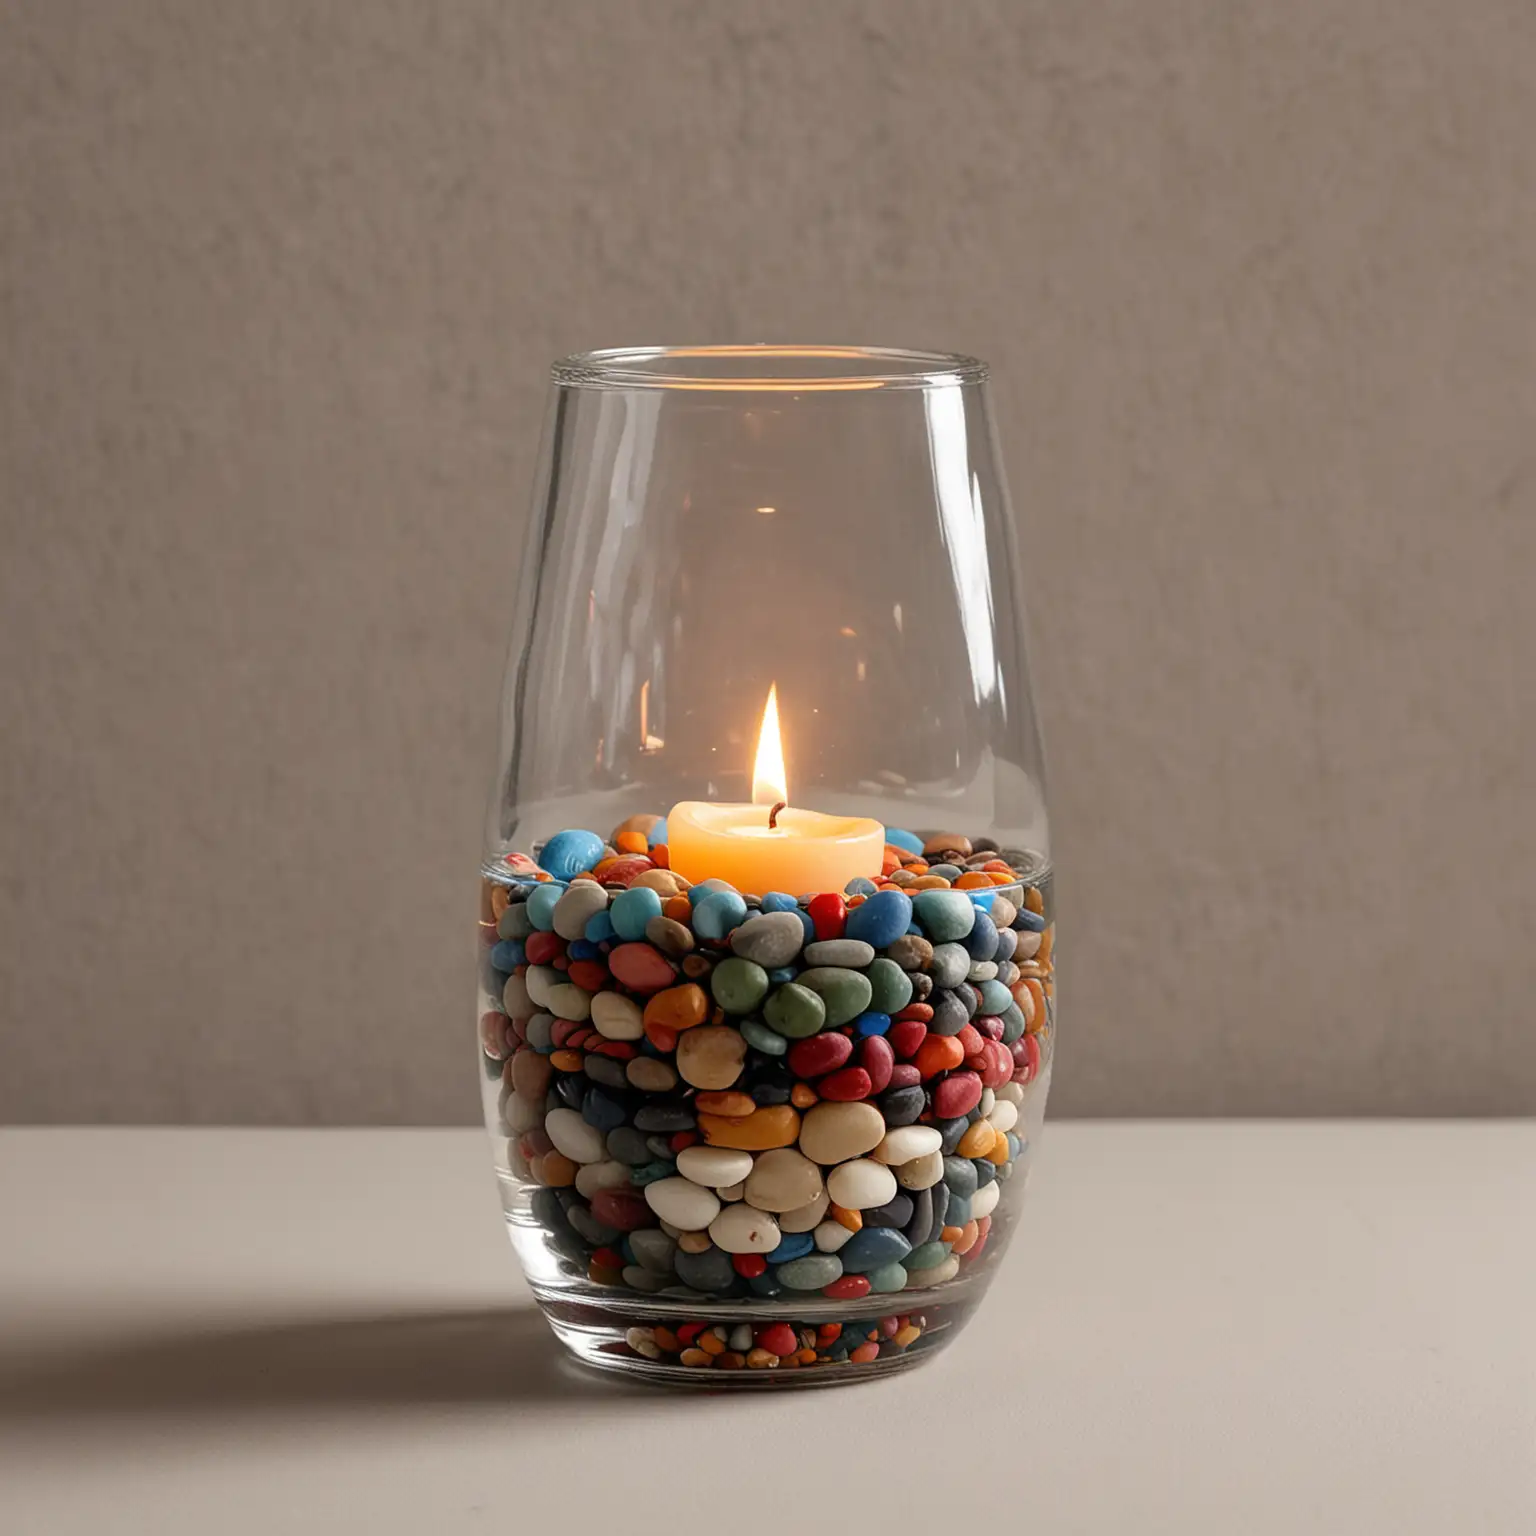 A single glass bud vase filled with layers of colored pebbles and water with a single tealight on top